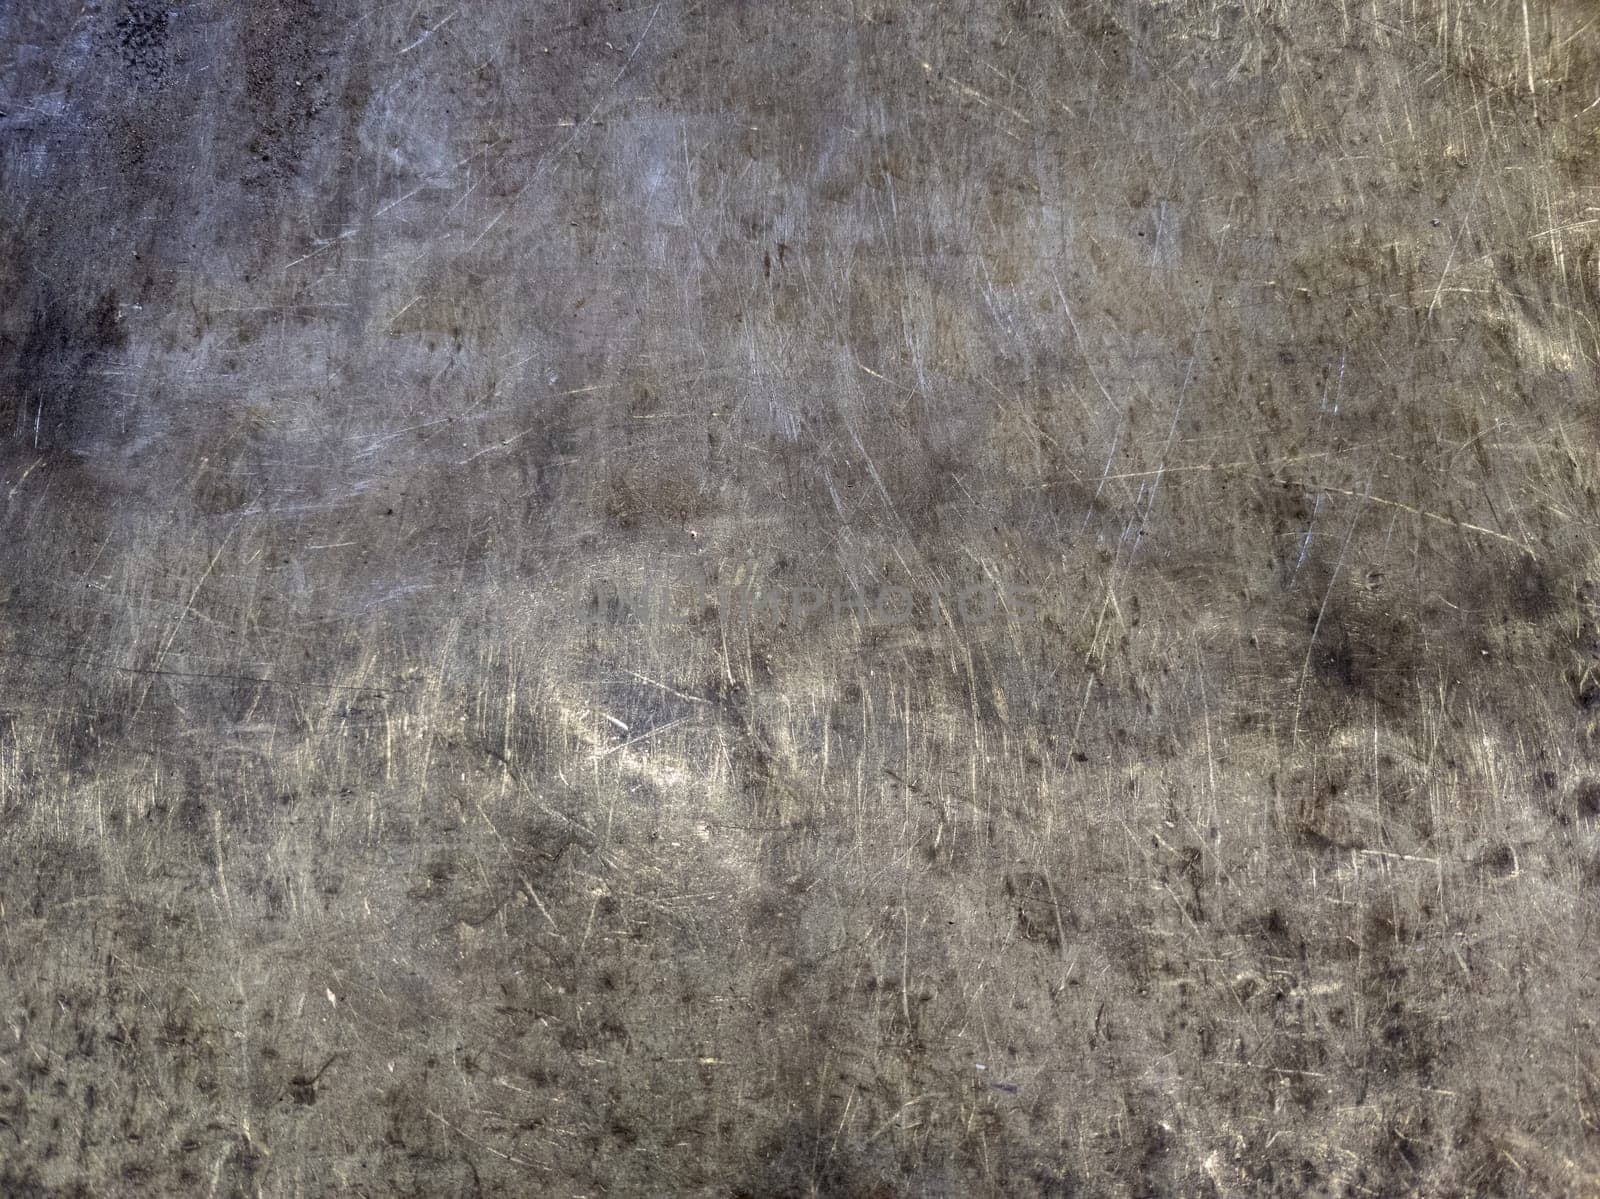 scratched beaten steel surface of workbench - texture and flat full-frame background.